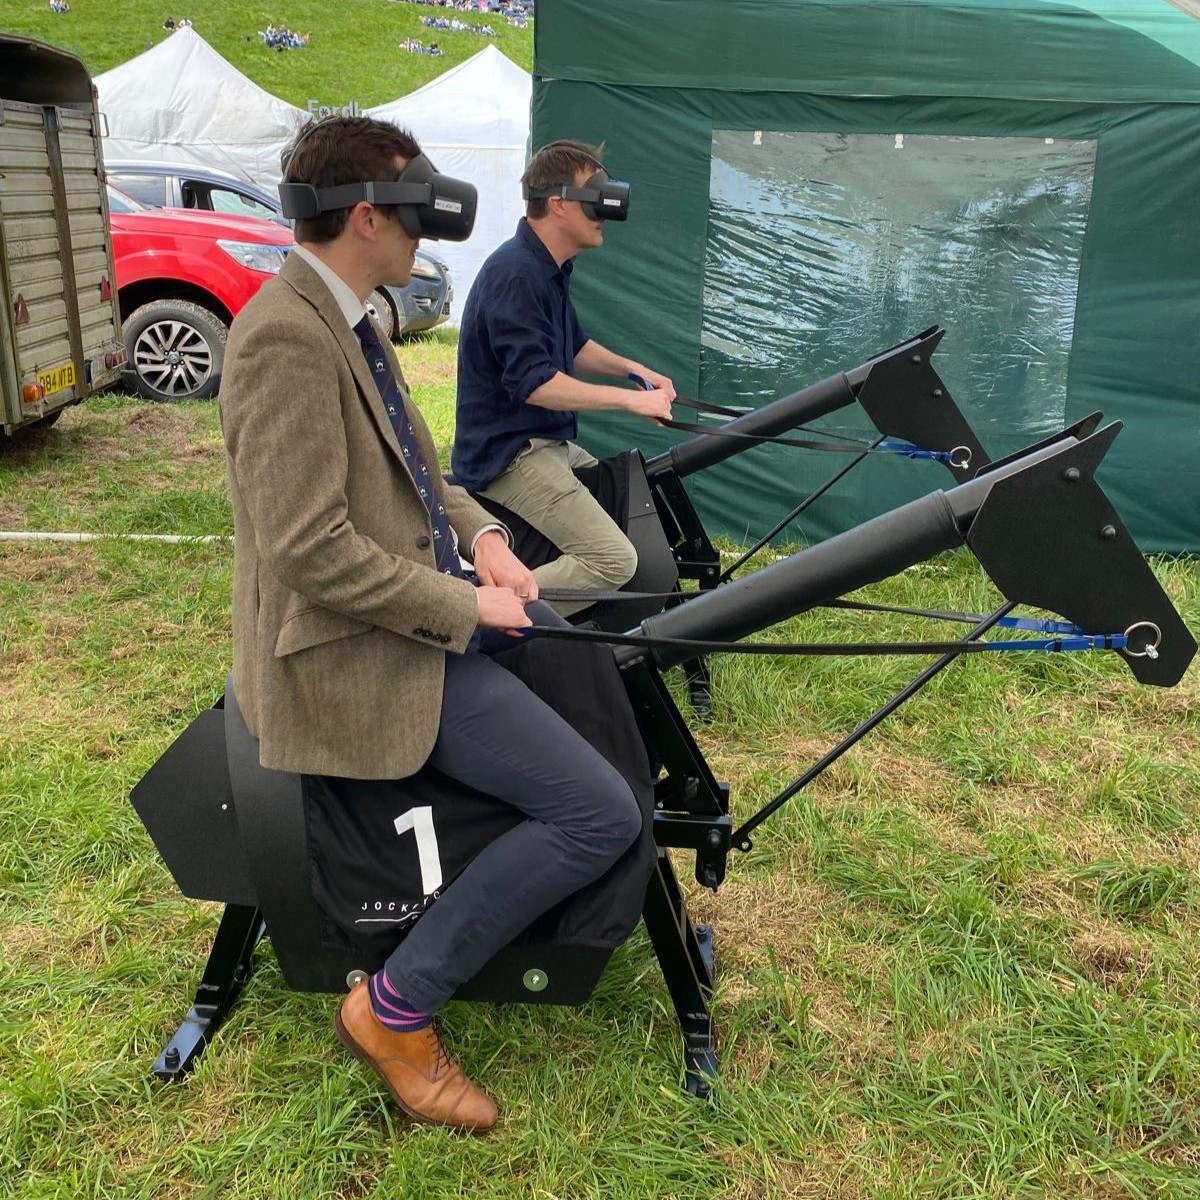 A sunny afternoon at Eyton races where visiting children had lots of fun with rounds of show jumping and a ‘jockeycam’ for those 'big kids' who fancied themselves as jockeys! #thisisoswestry #eytonraces #eytonraces2024 #shropshire #maybankholiday @EytonRaces